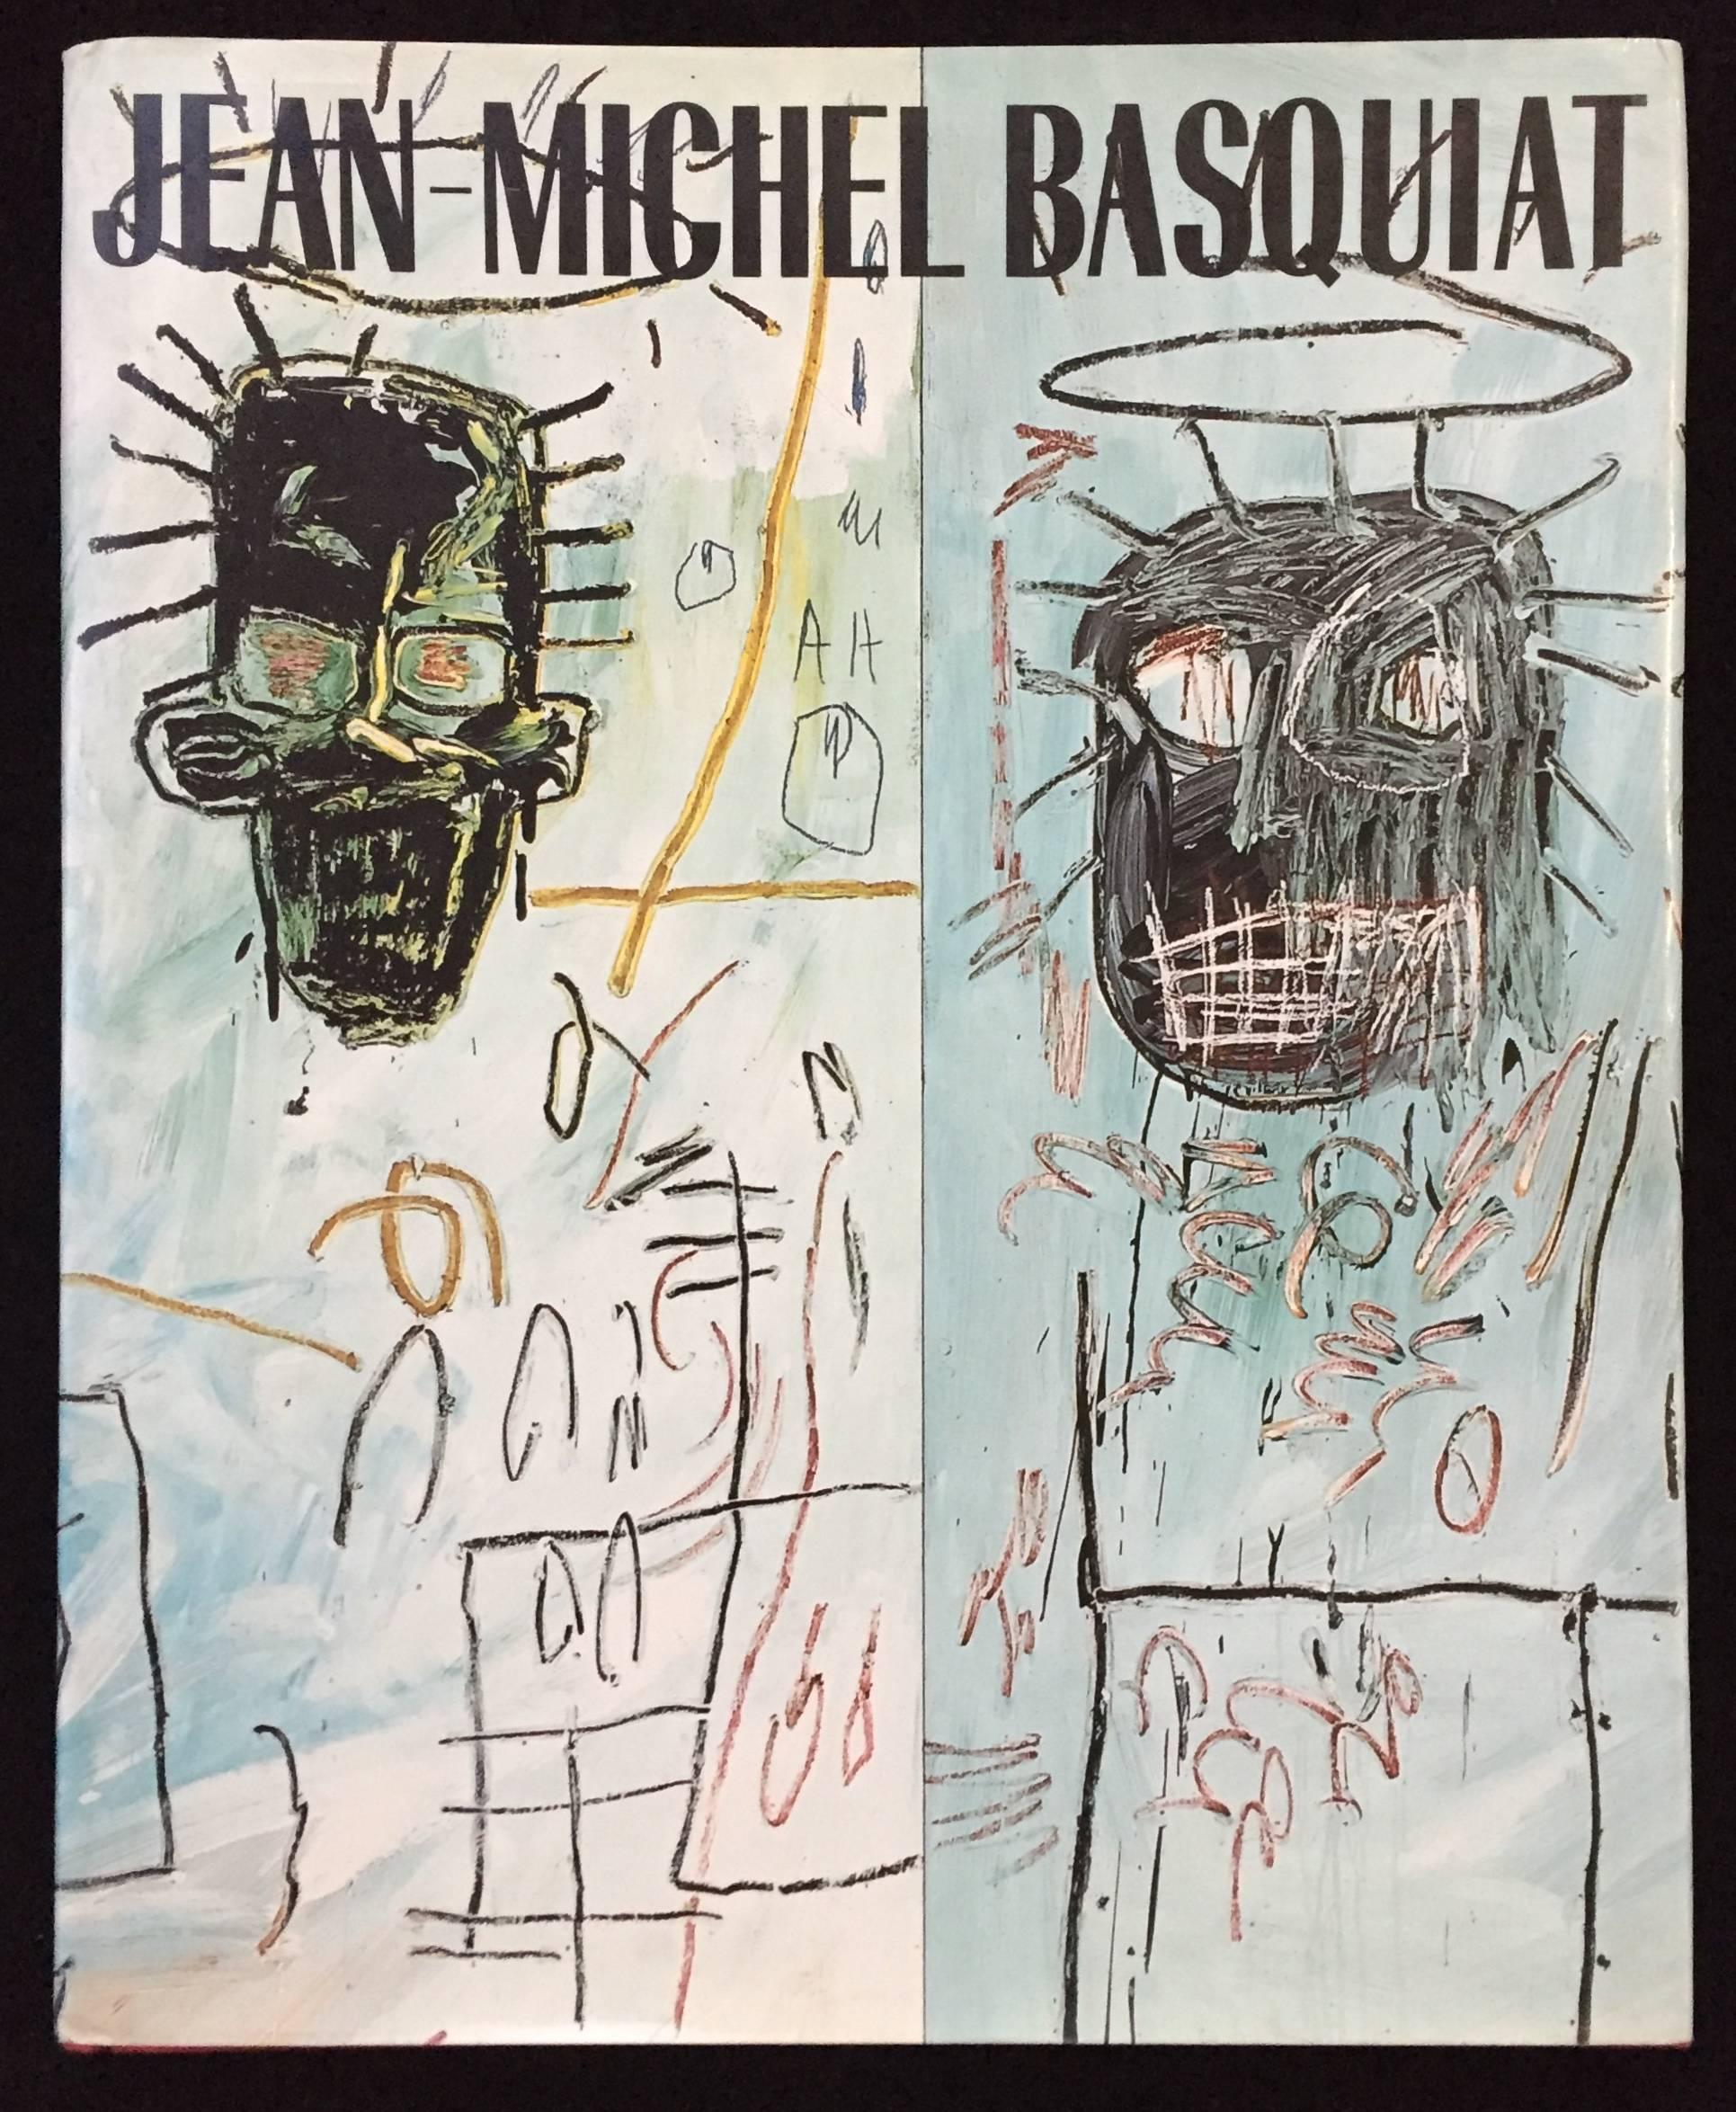 Basquiat at Vrej Baghoomian (exhibition catalog)  - Print by (after) Jean-Michel Basquiat